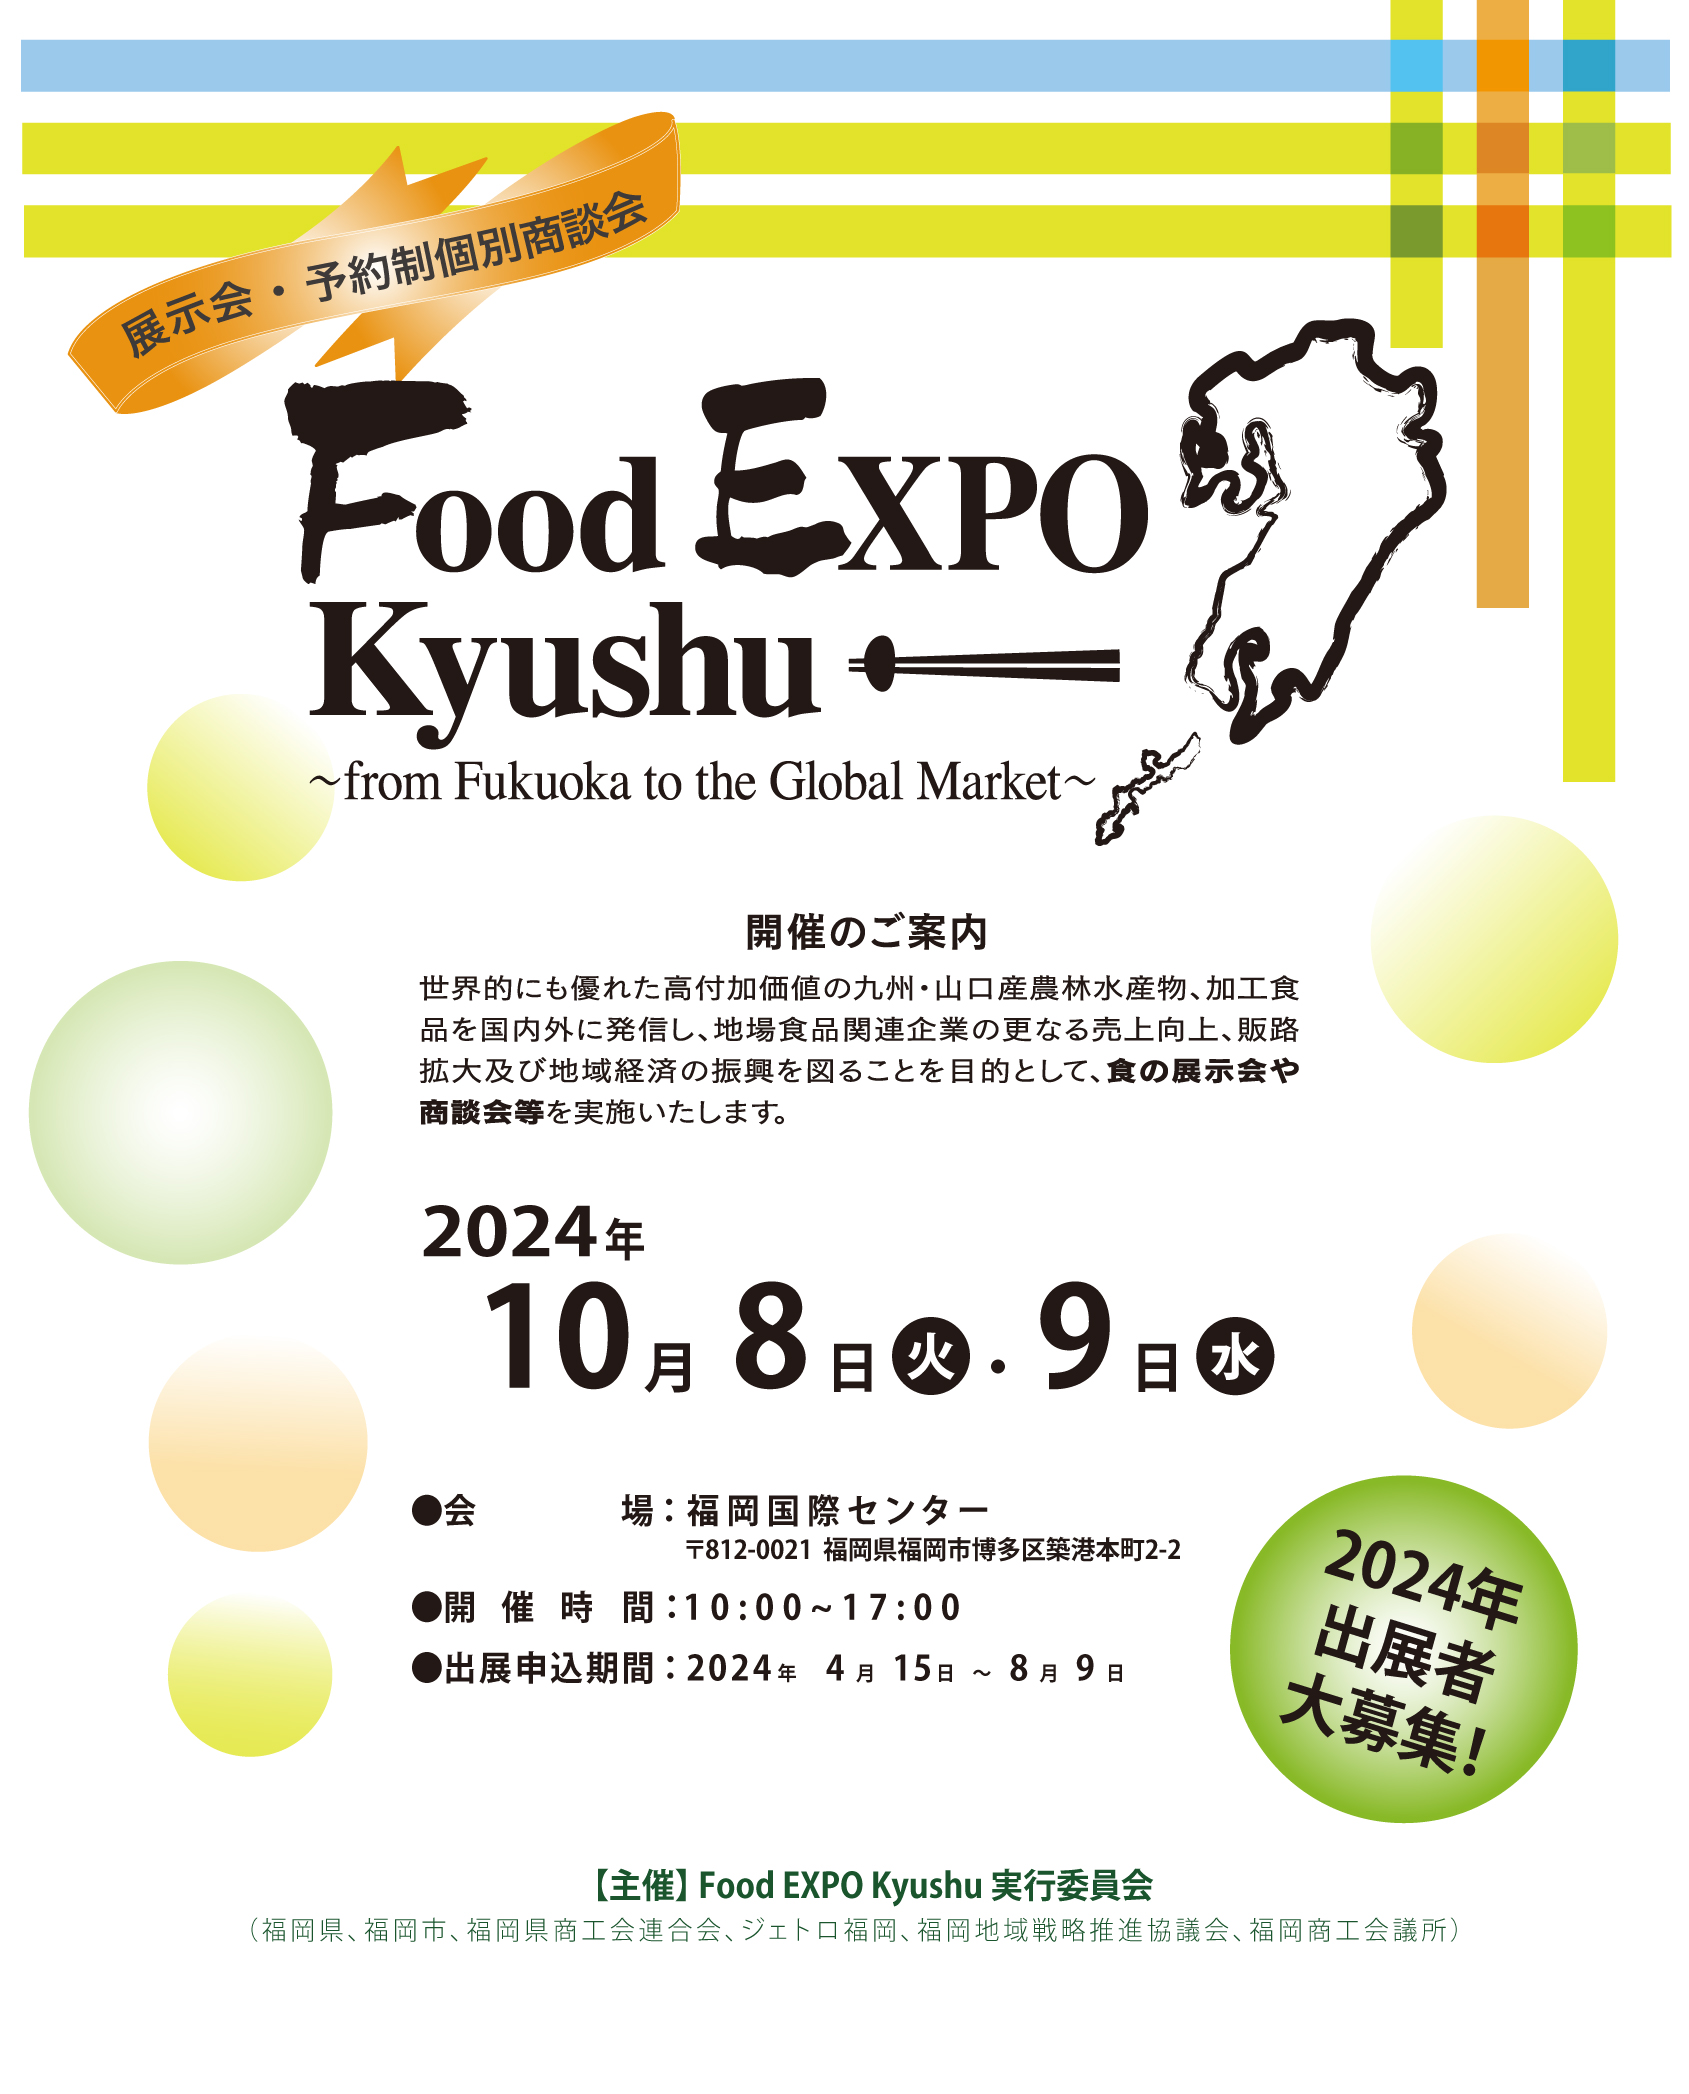 Food EXPO Kyushu 2024（フードエキスポ九州）